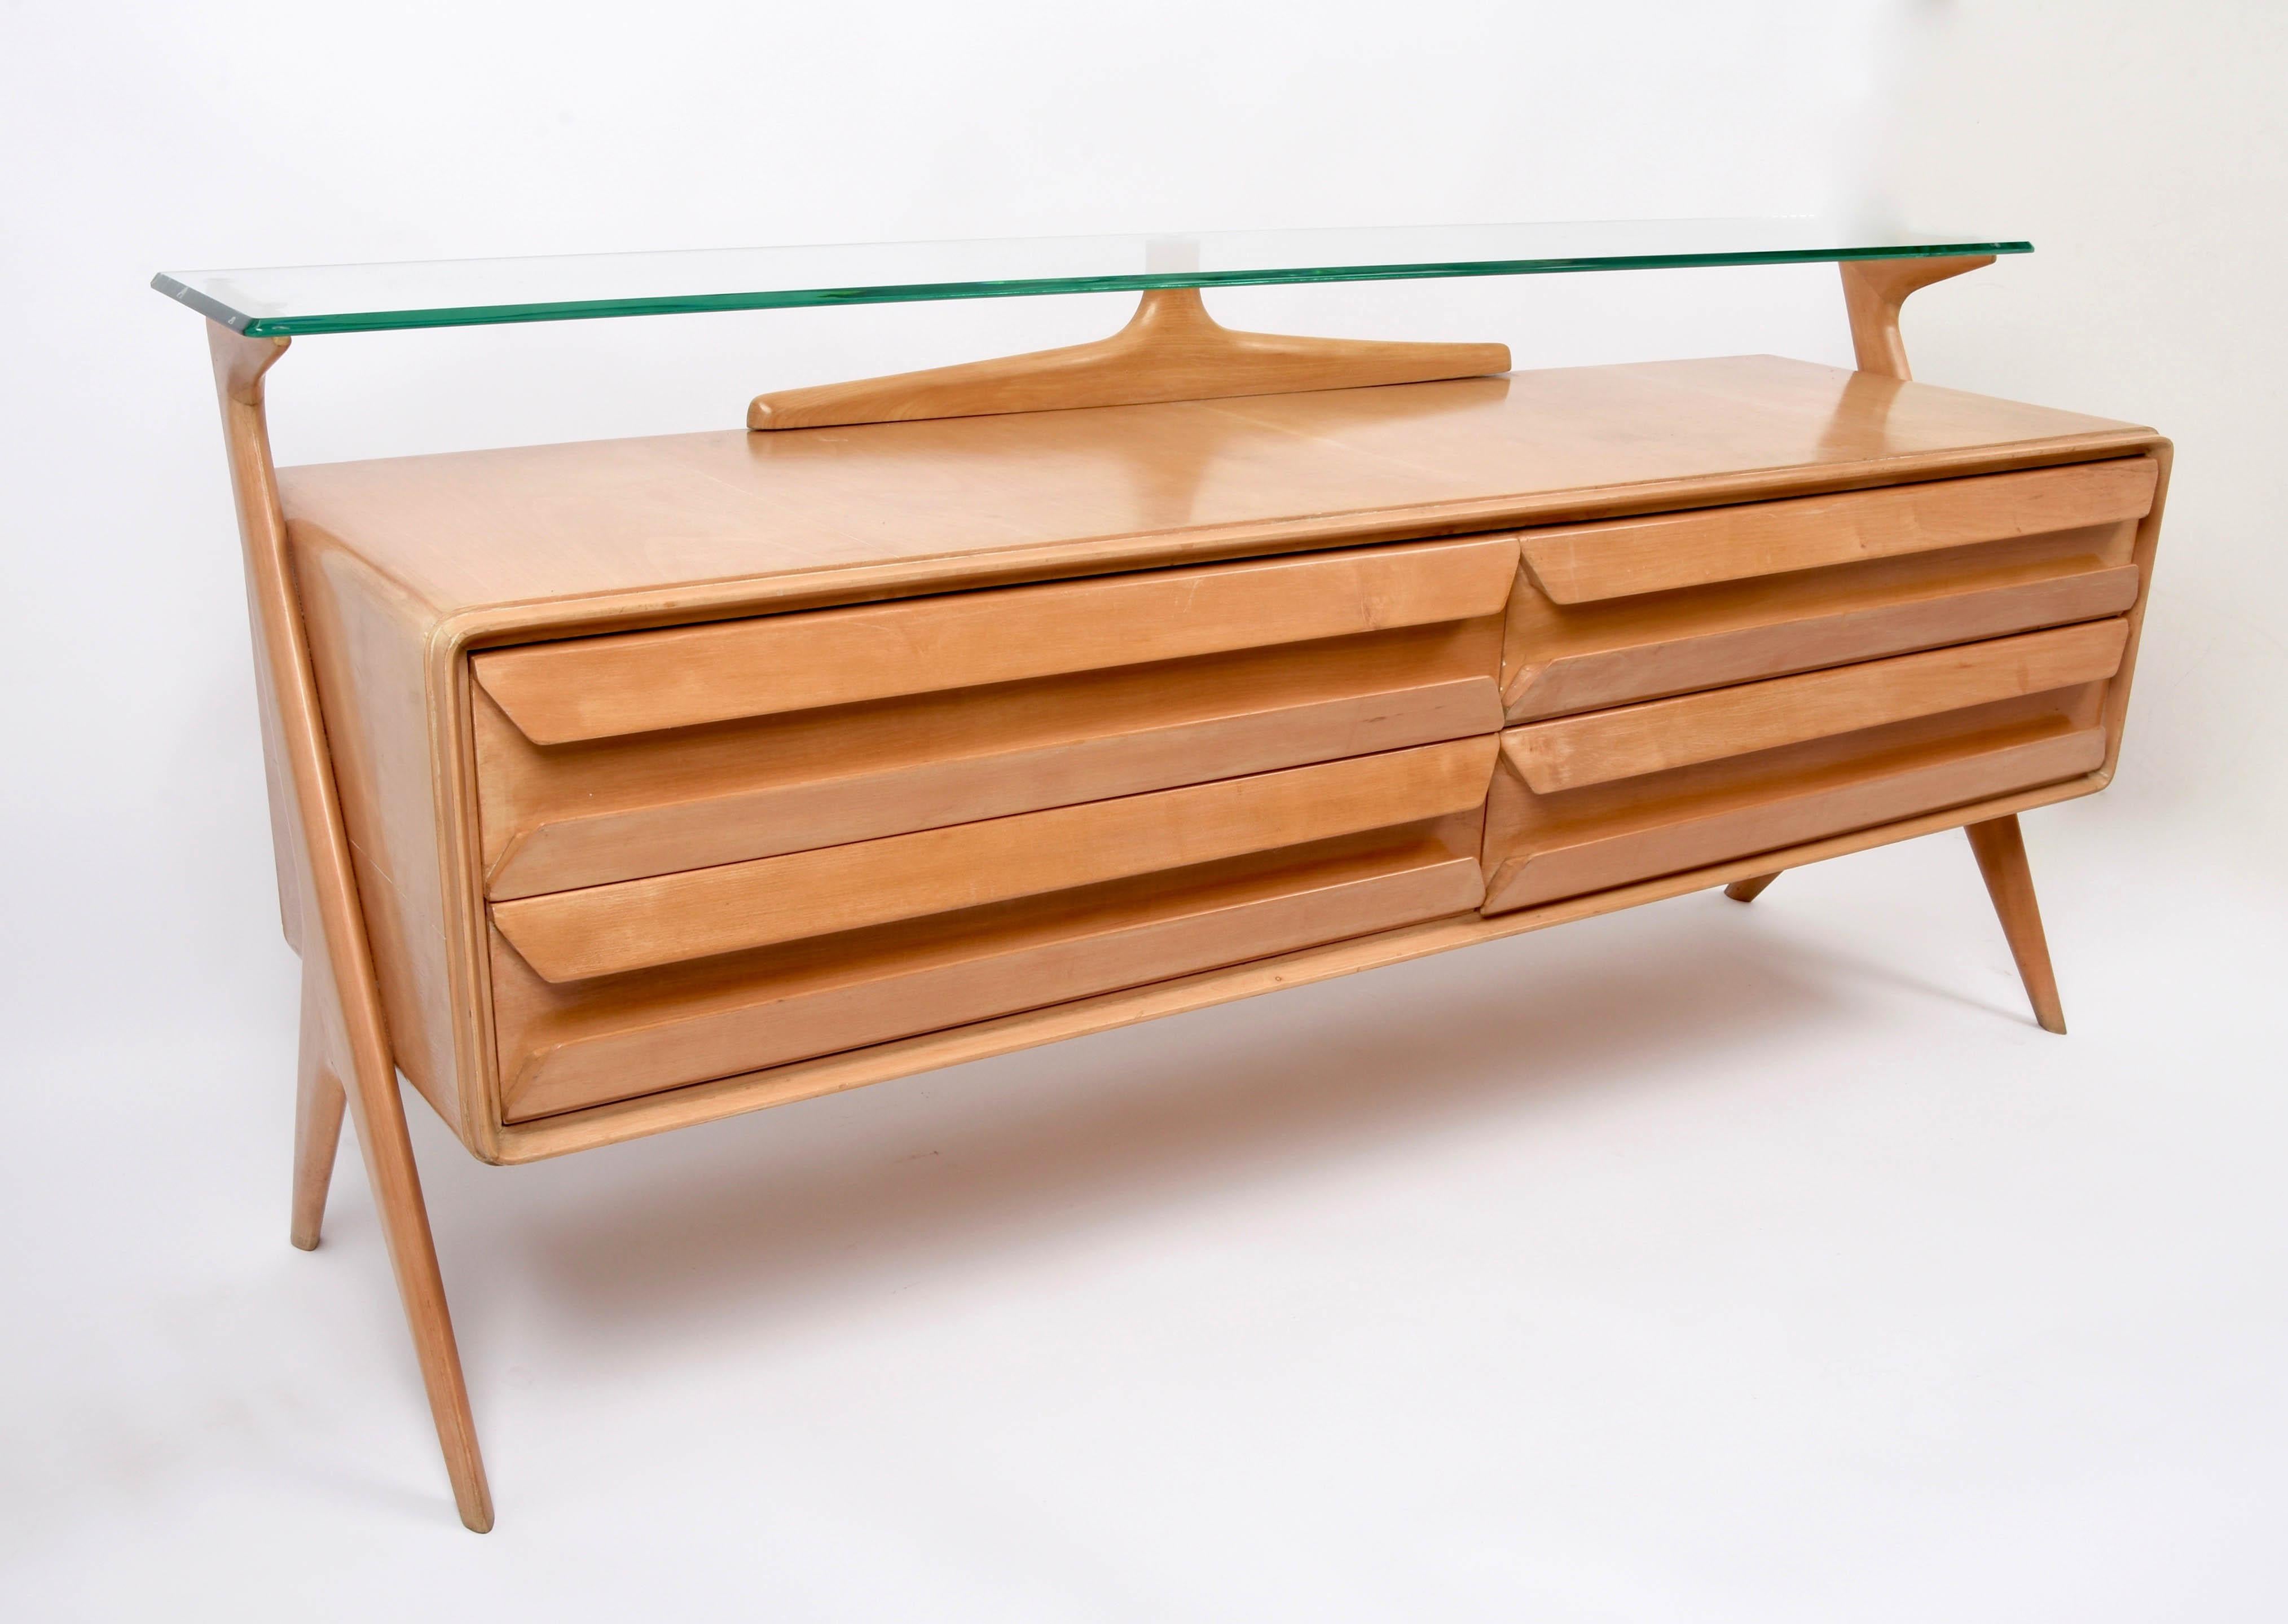 Amazing midcentury maple wood sideboard with glass shelf. This fantastic piece was designed by Vittorio, Alessandro and Plinio Dassi and produced in Lissone, Italy, during the 1950s by Dassi in Lissone.

This wonderful sideboard is in clear maple